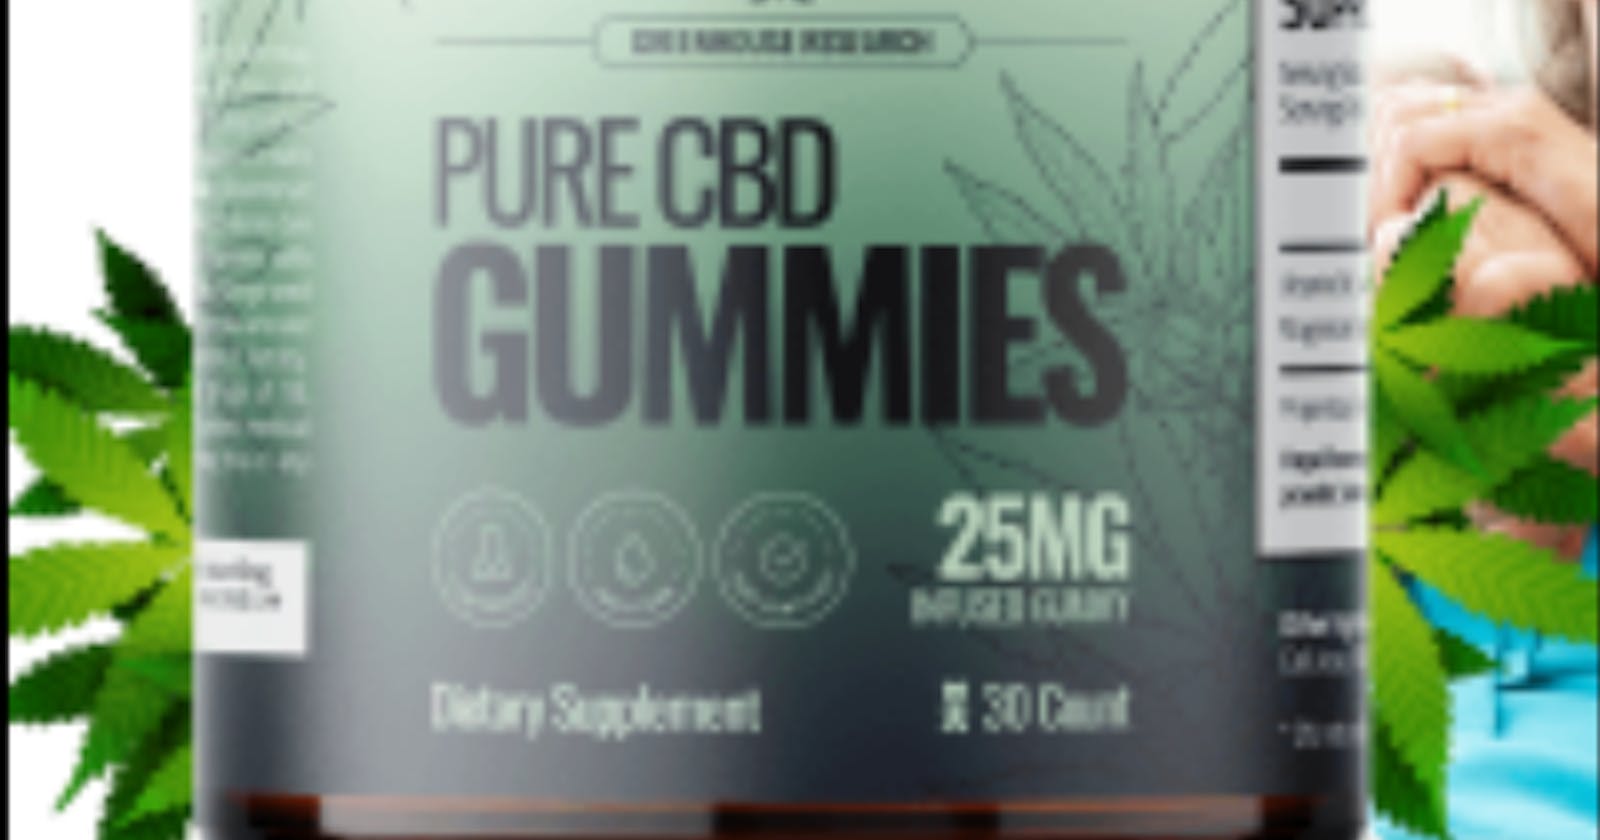 Vitapur CBD Gummies Reviews, For Sale, Cost, Price, Amazon, Shark Tank, For Tinnitus, Ingredients, Where To Buy?